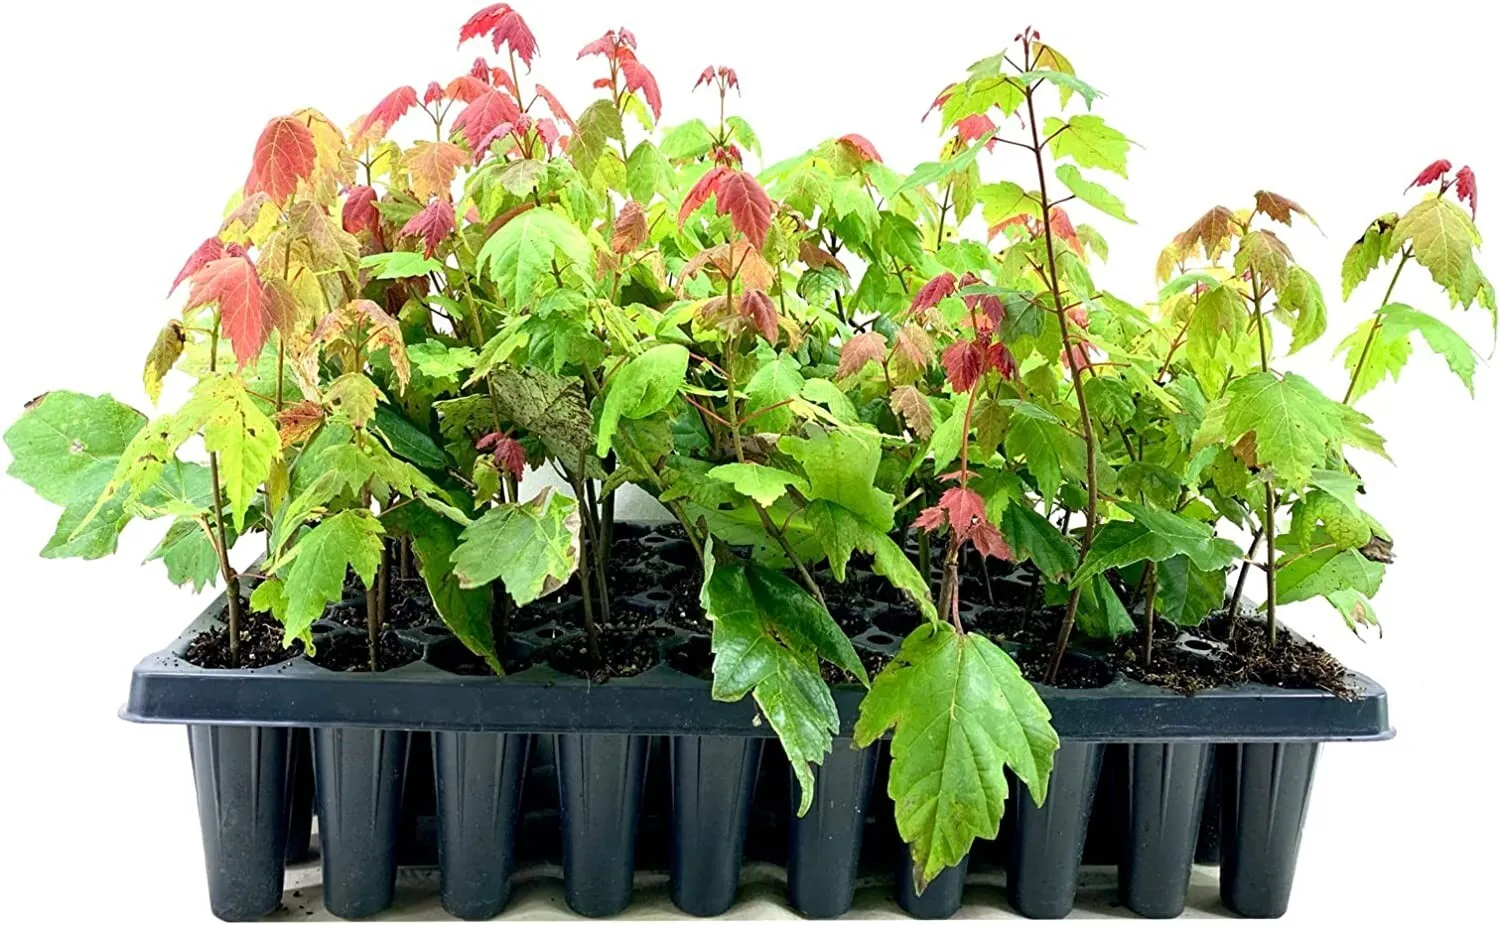 Florida Flame Red Maple Tree Live Plants Acer Rubrum Shade - $43.49